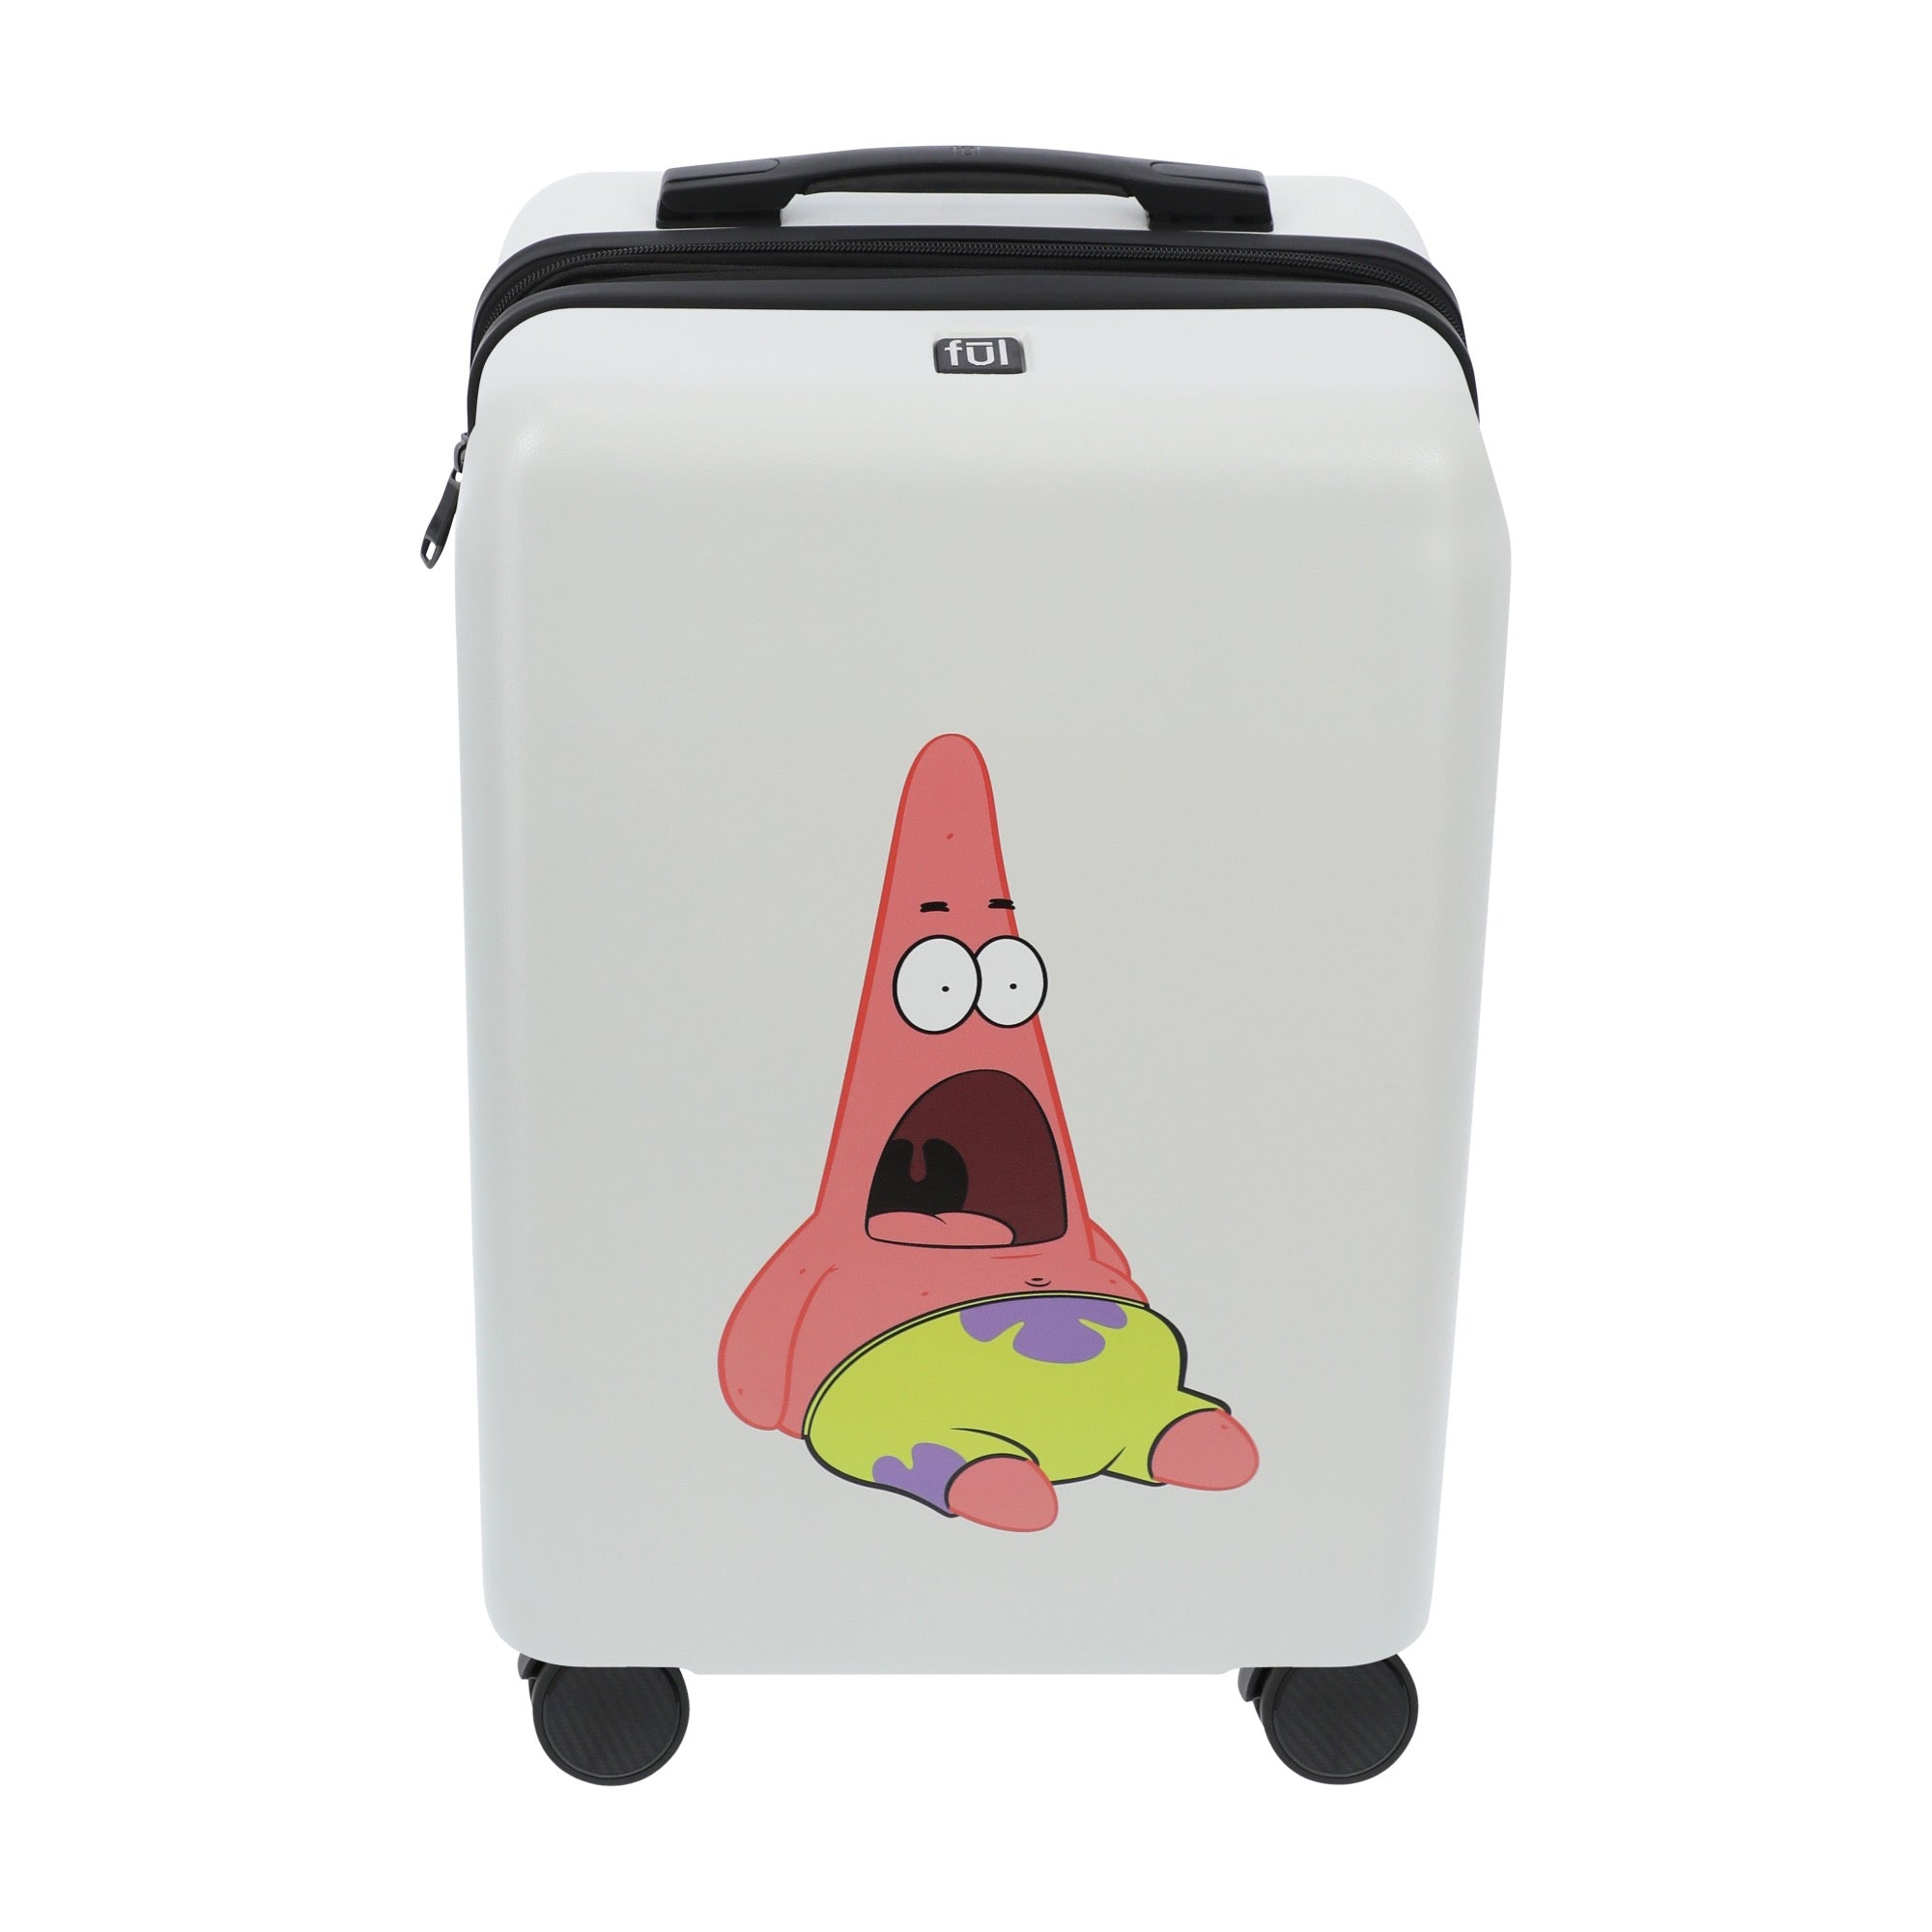 White nickelodeon spongebob-patrick 22.5" carry-on spinner suitcase luggage by Ful